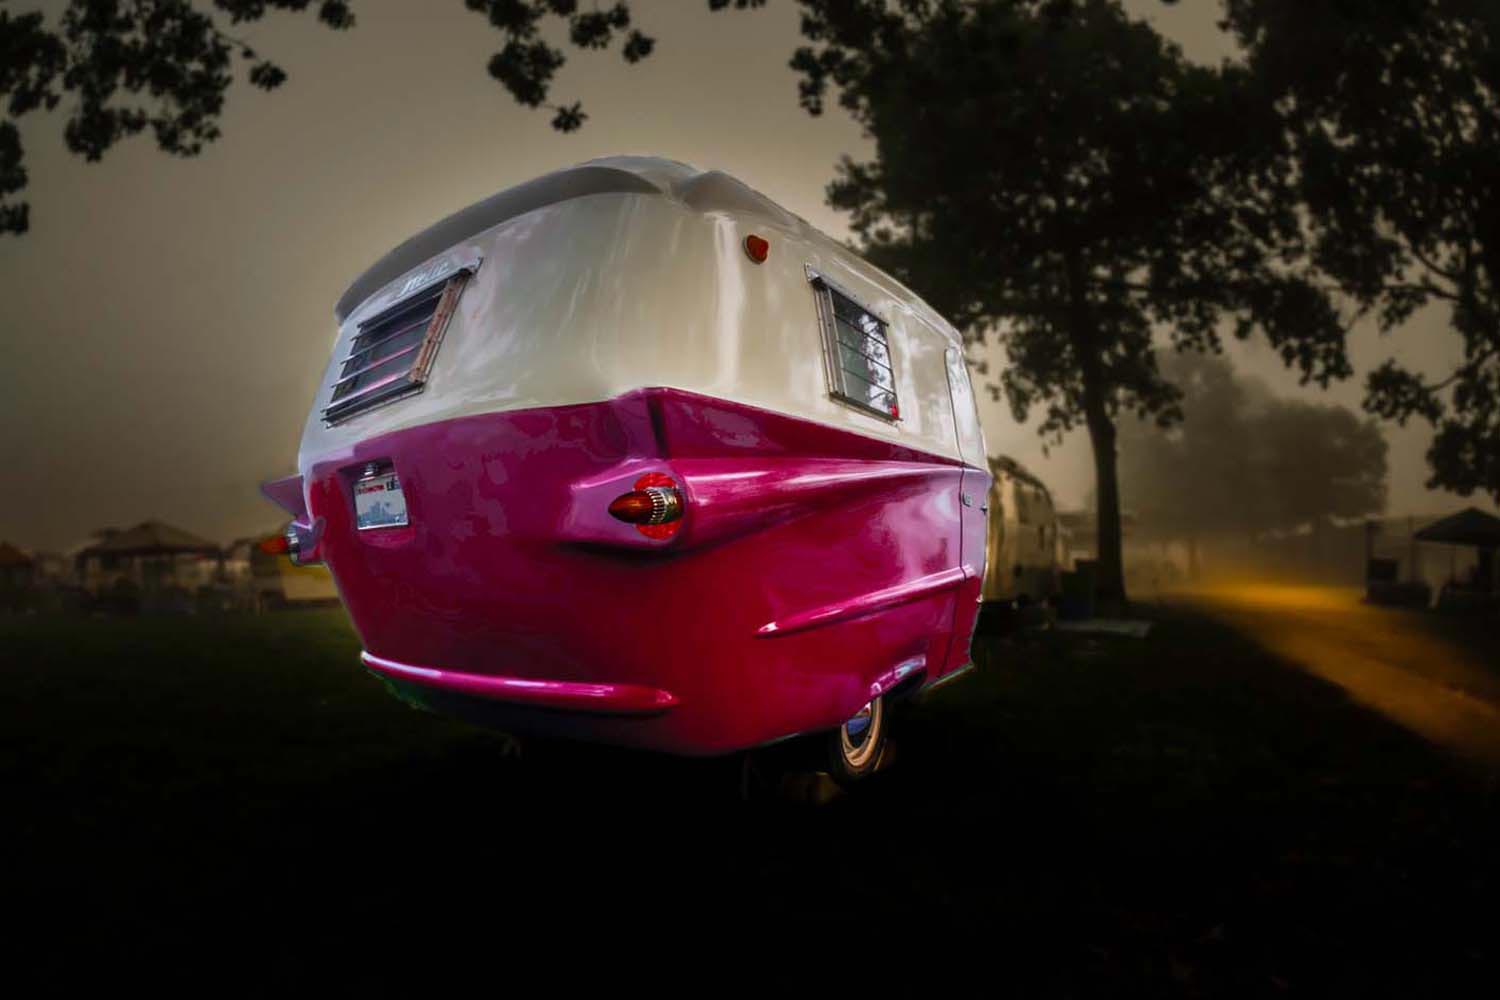 relic custom trailers are 60s inspired campers 003